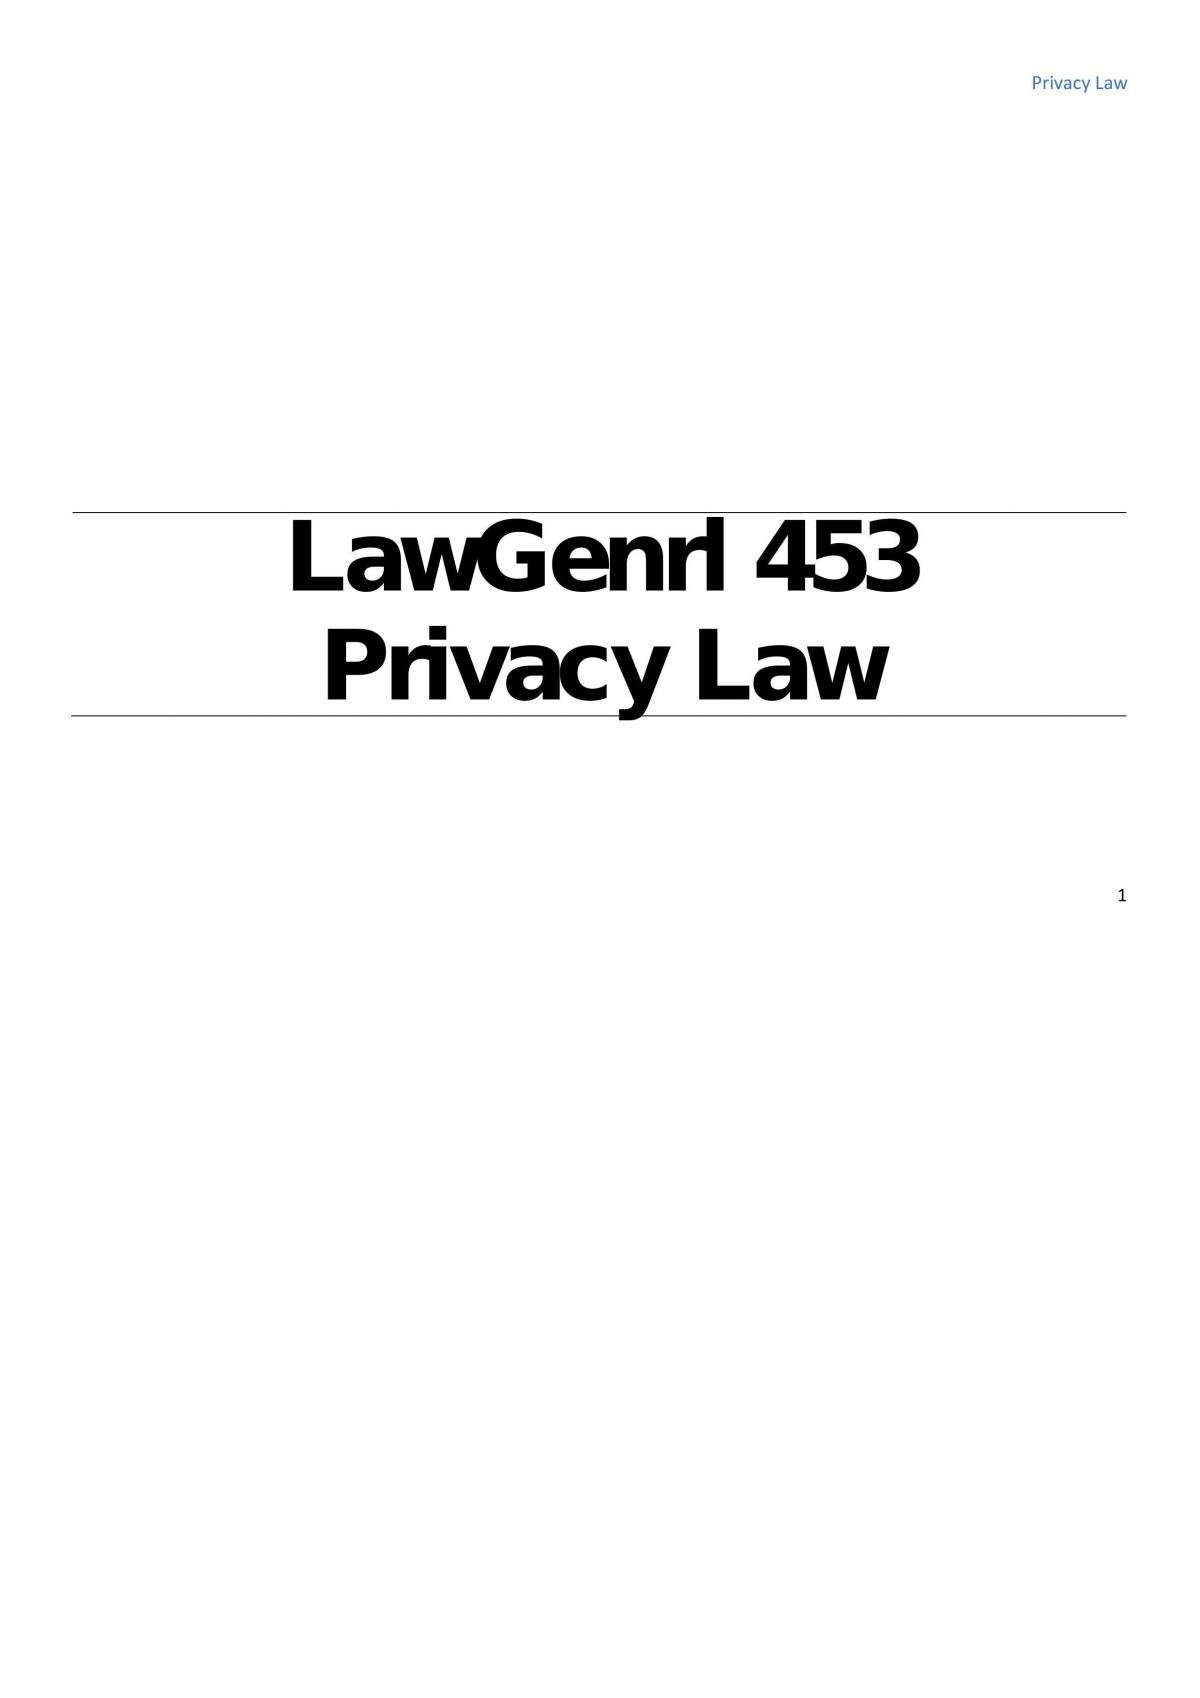 Privacy Law full subject notes - Page 1